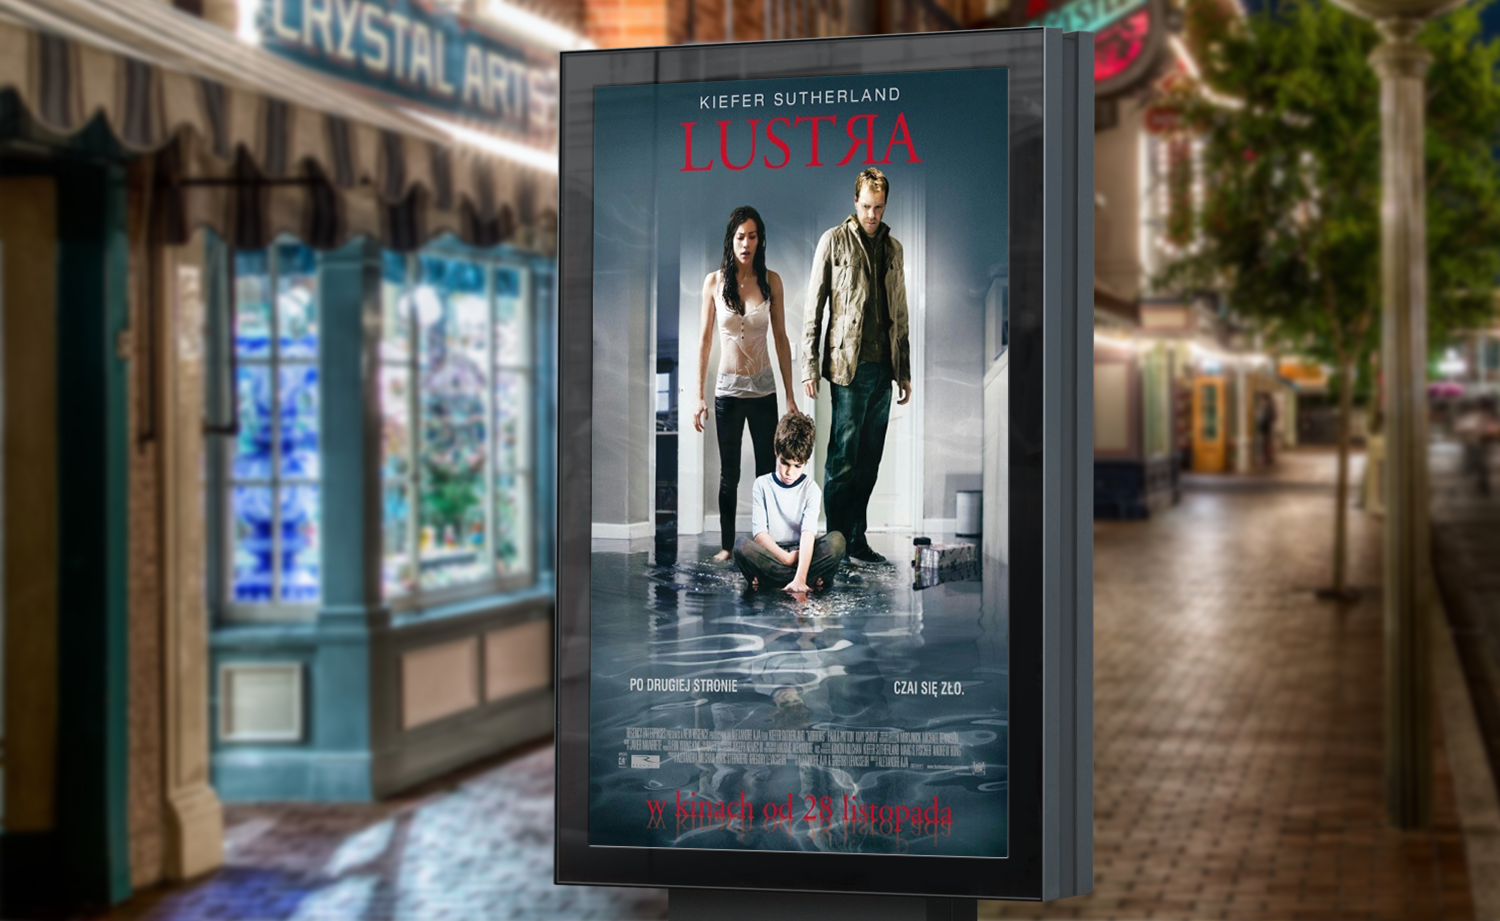 Advertising action for the movie Mirrors